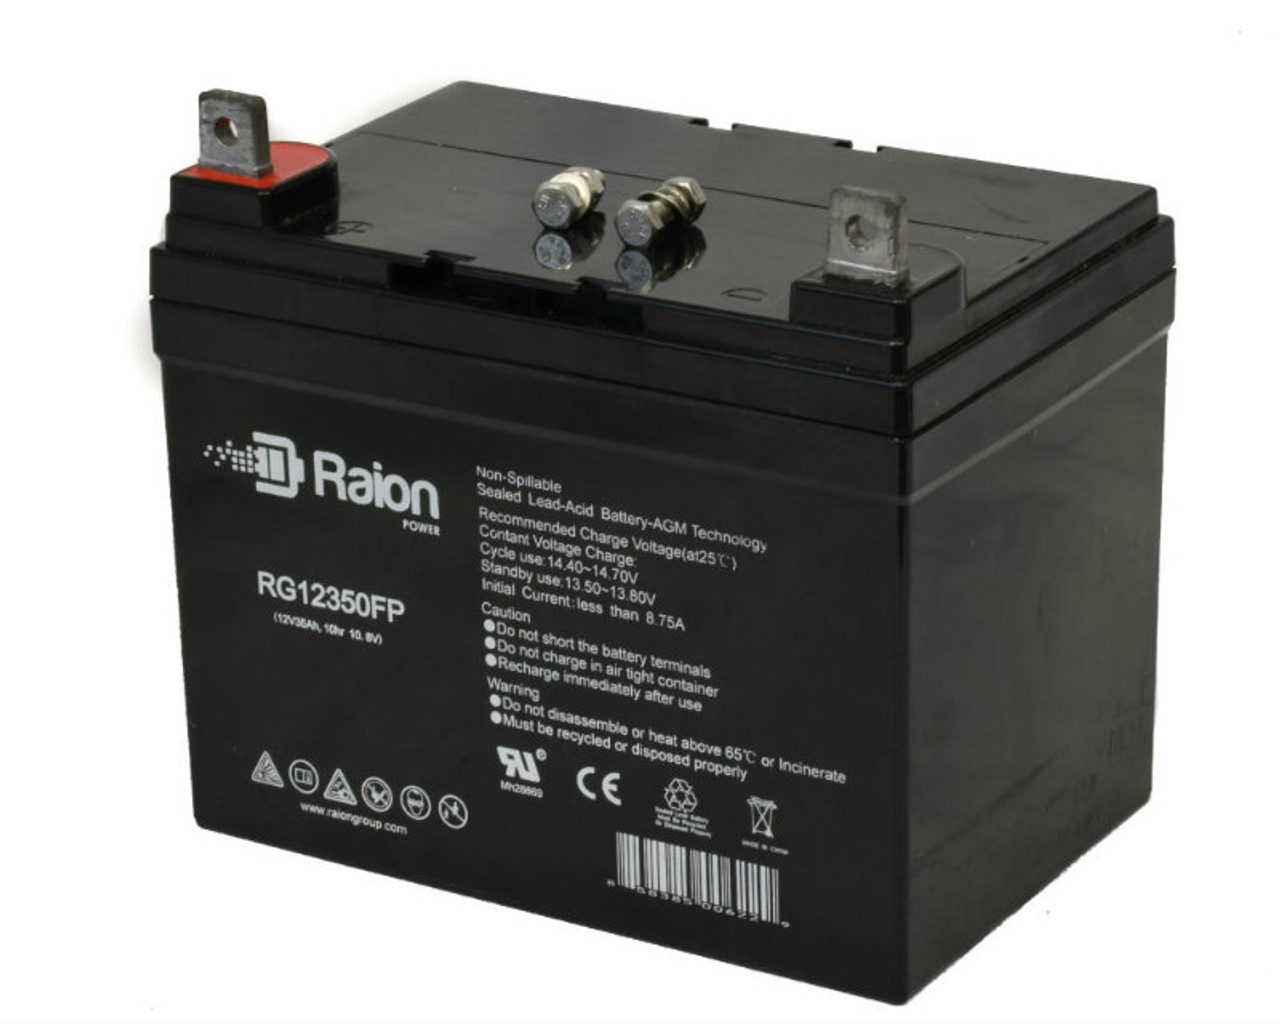 Raion Power Replacement 12V 35Ah RG12350FP Battery for Mule PM12330